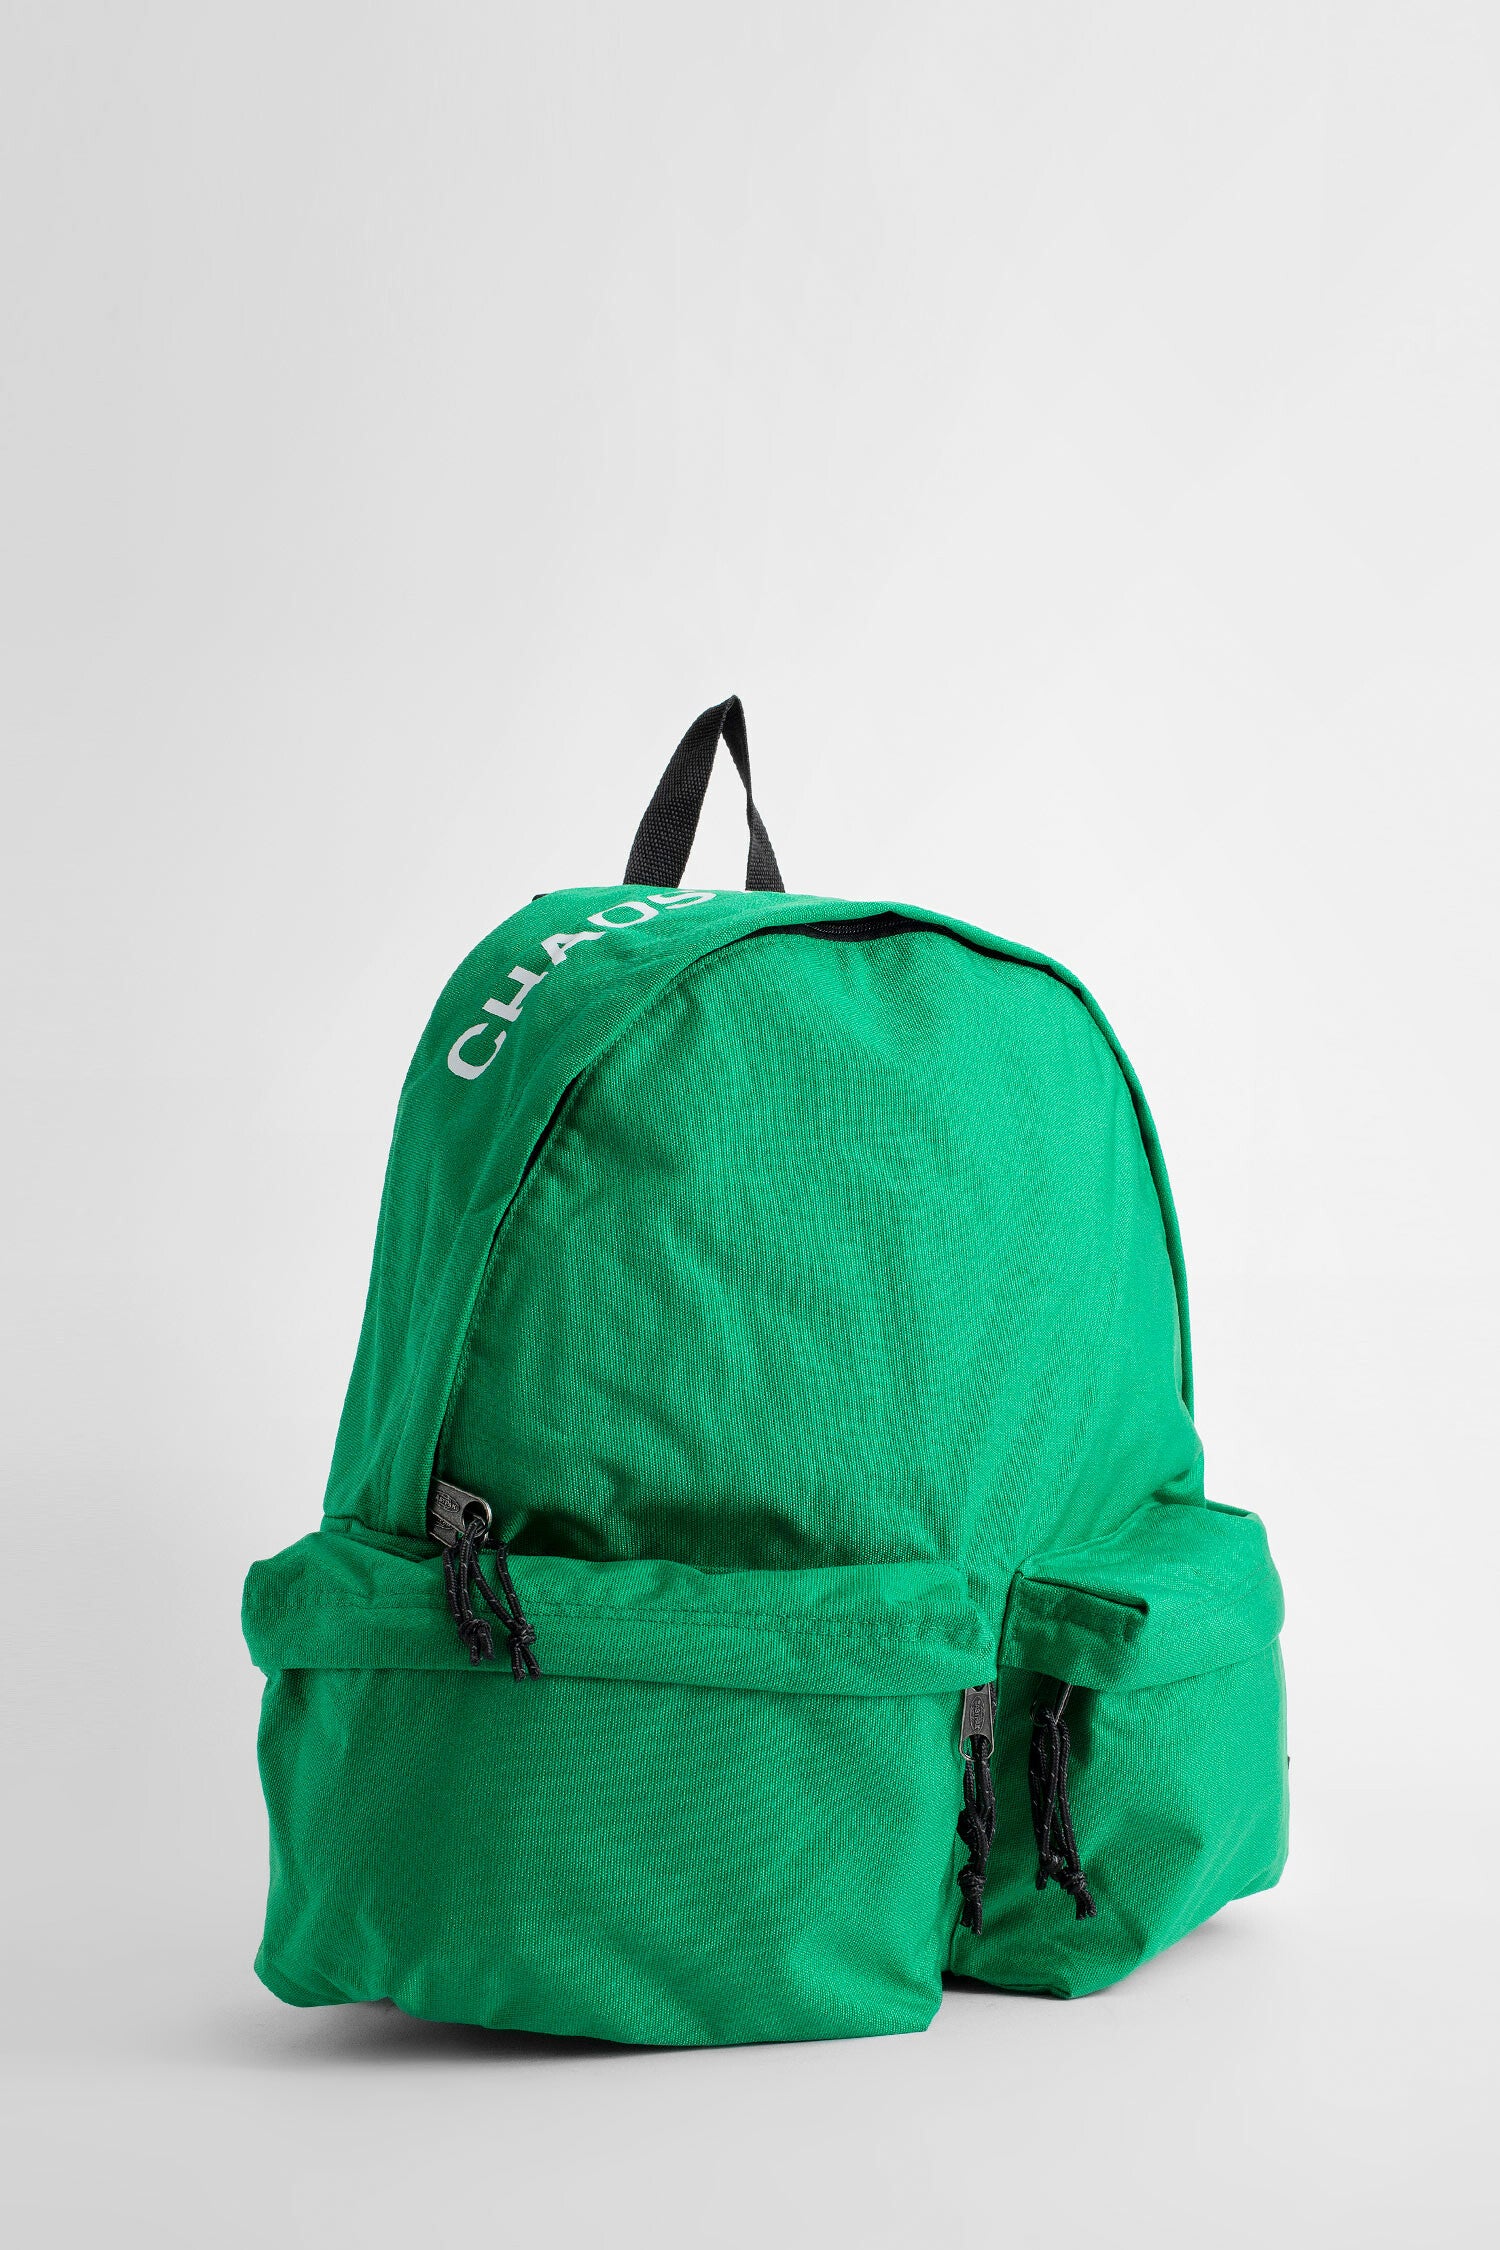 UNDERCOVER MAN GREEN BACKPACKS & TRAVEL BAGS